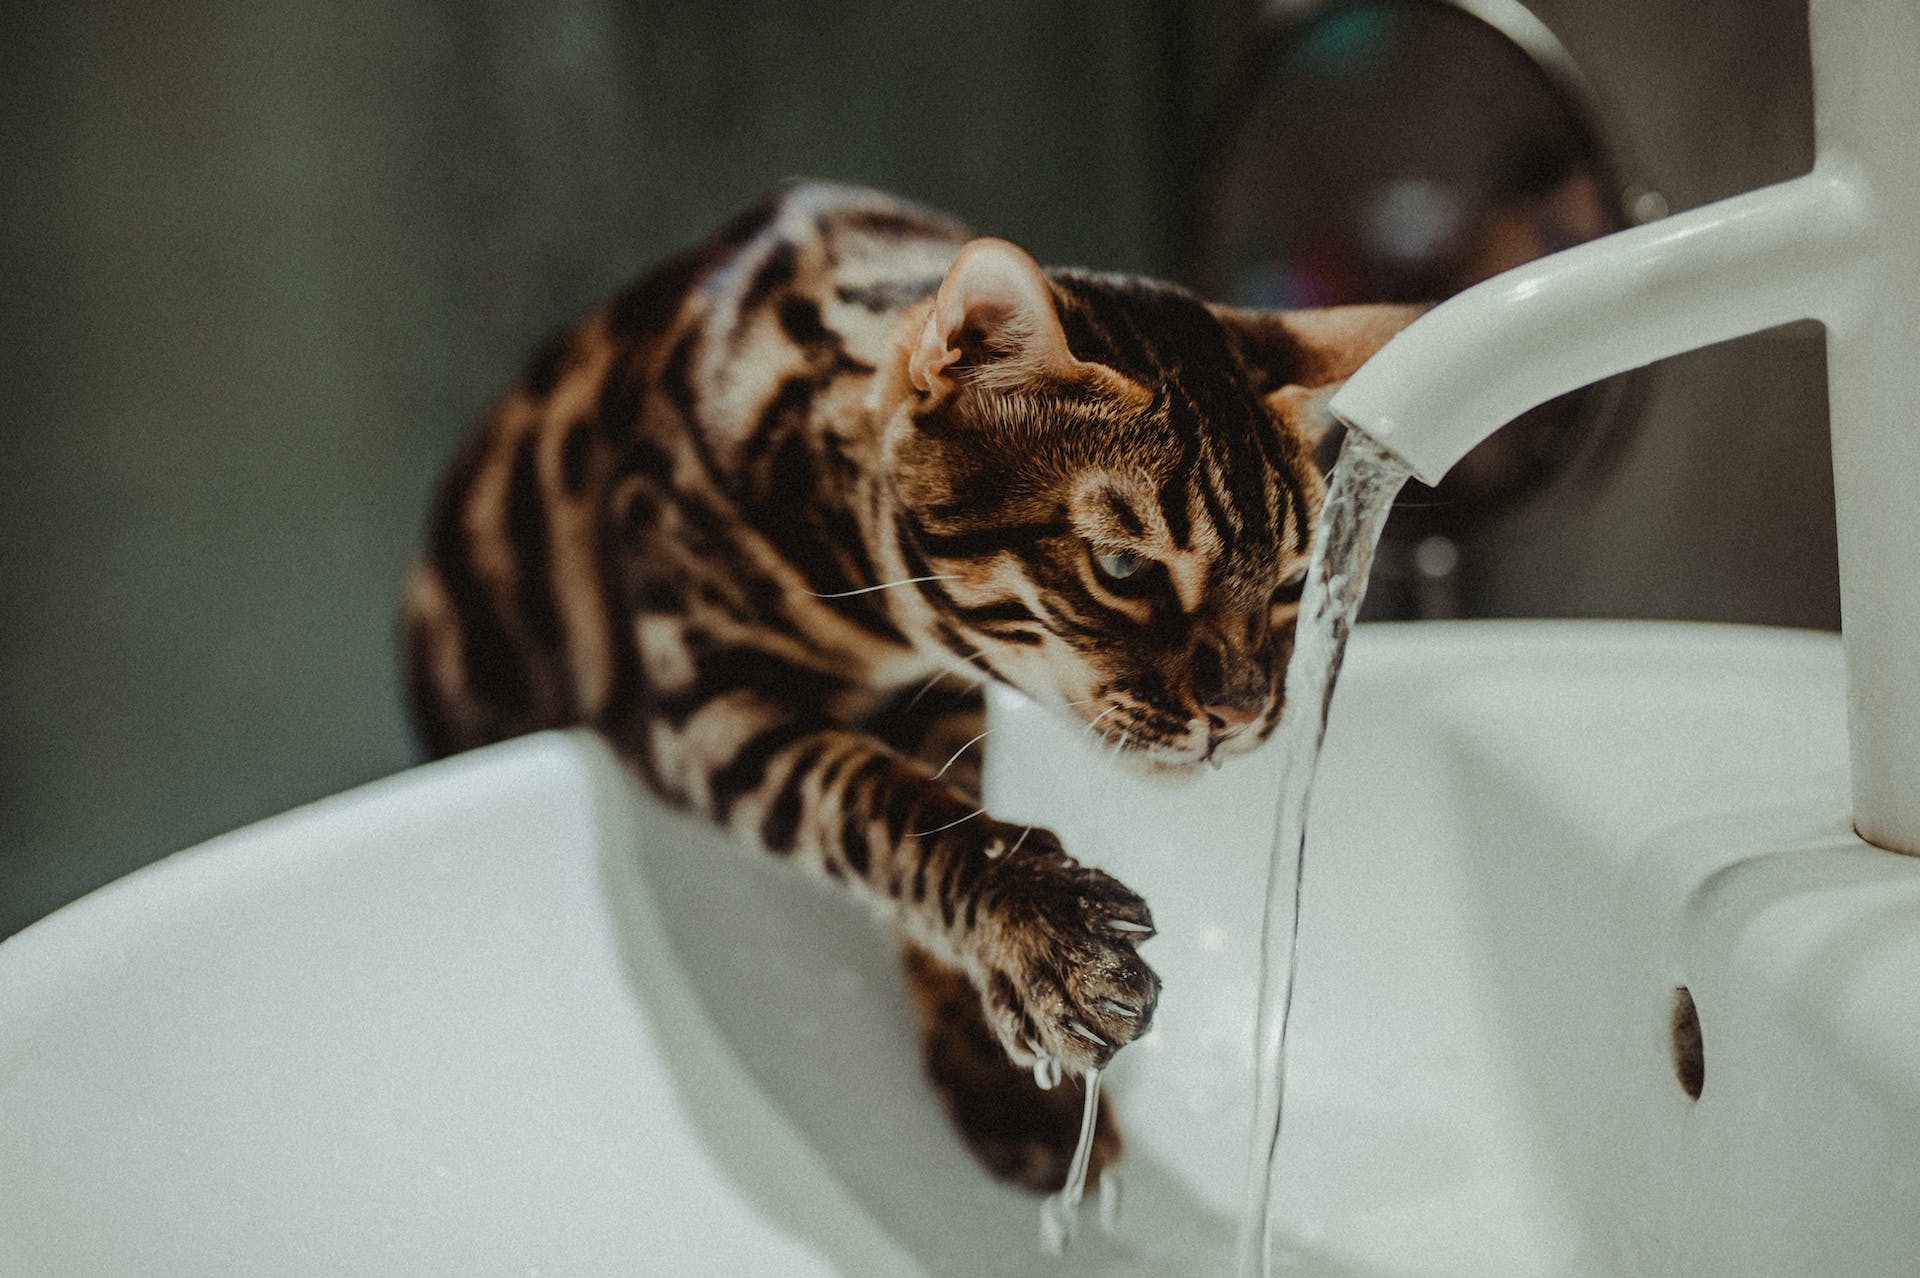 A Bengal cat dipping their paws into a stream of water from a bathroom sink